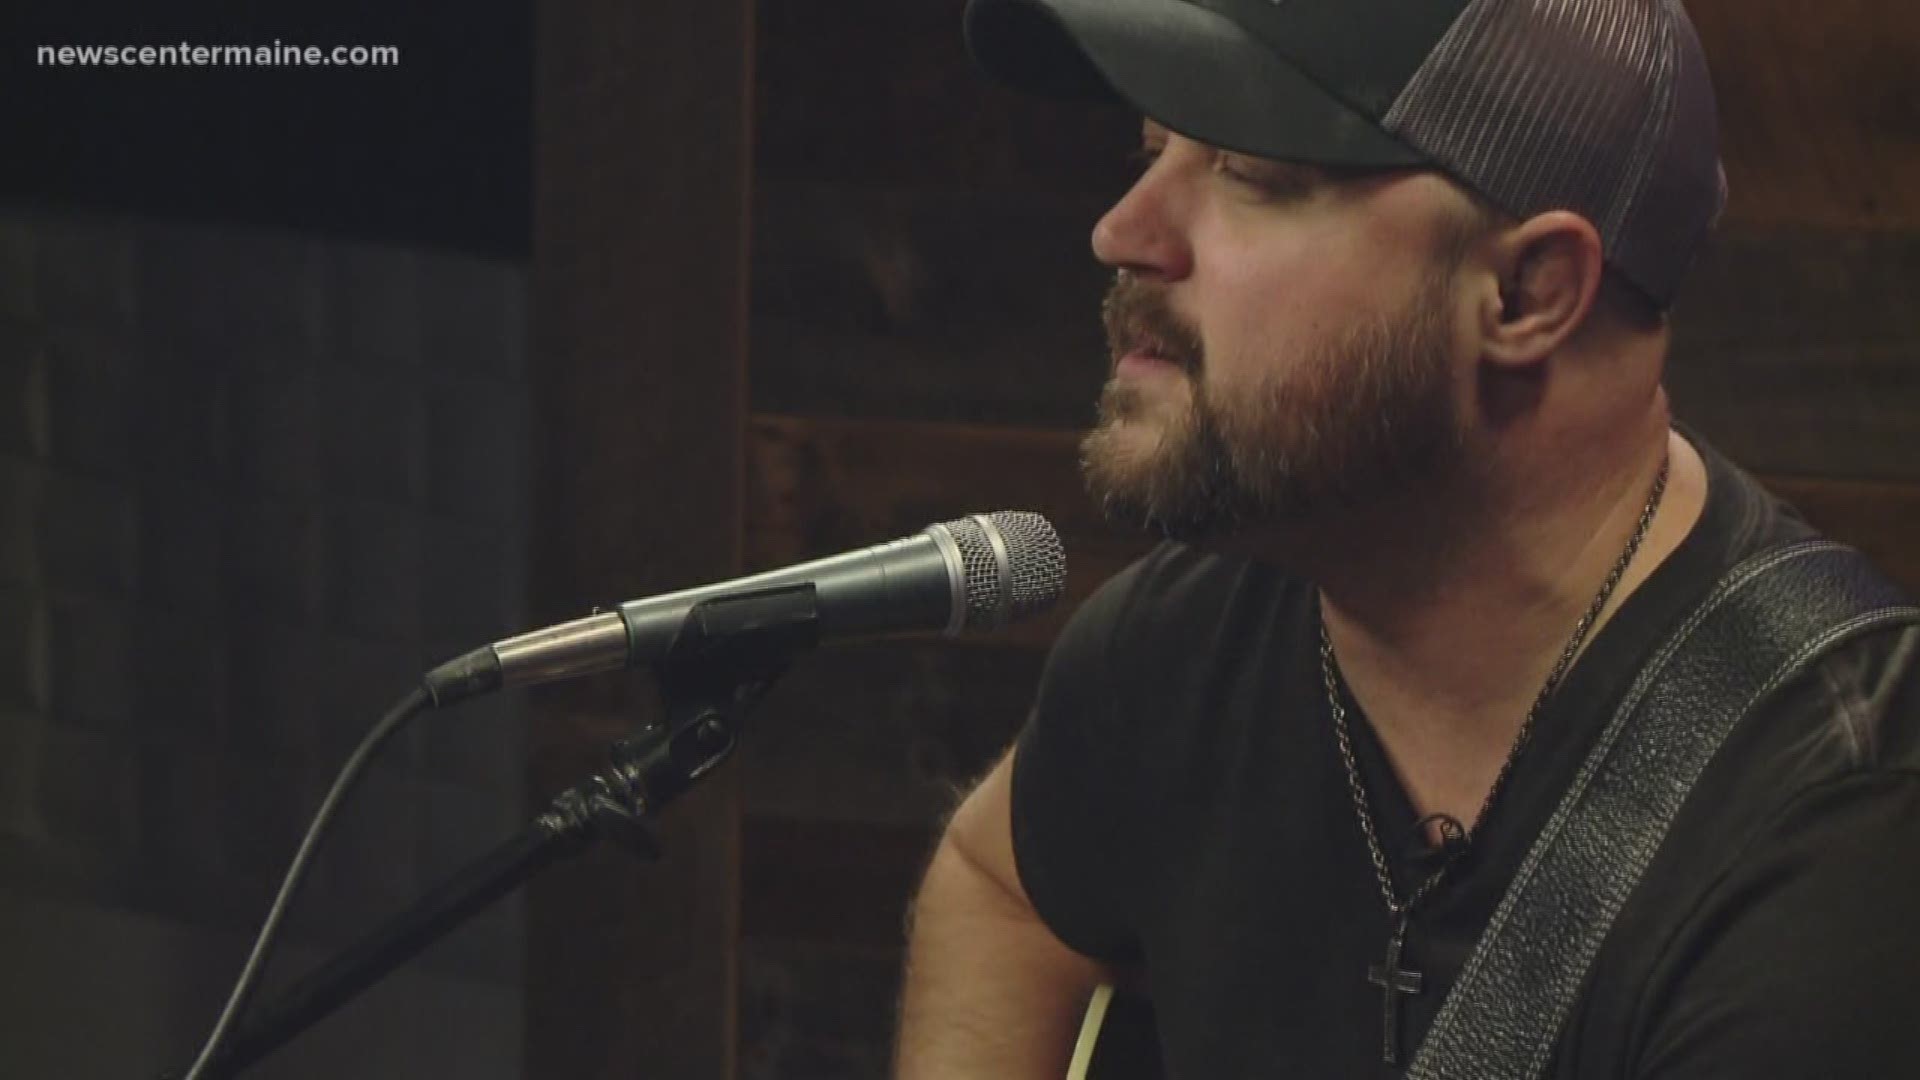 From Canada to Nashville, Aaron Goodvin is a storyteller through music.